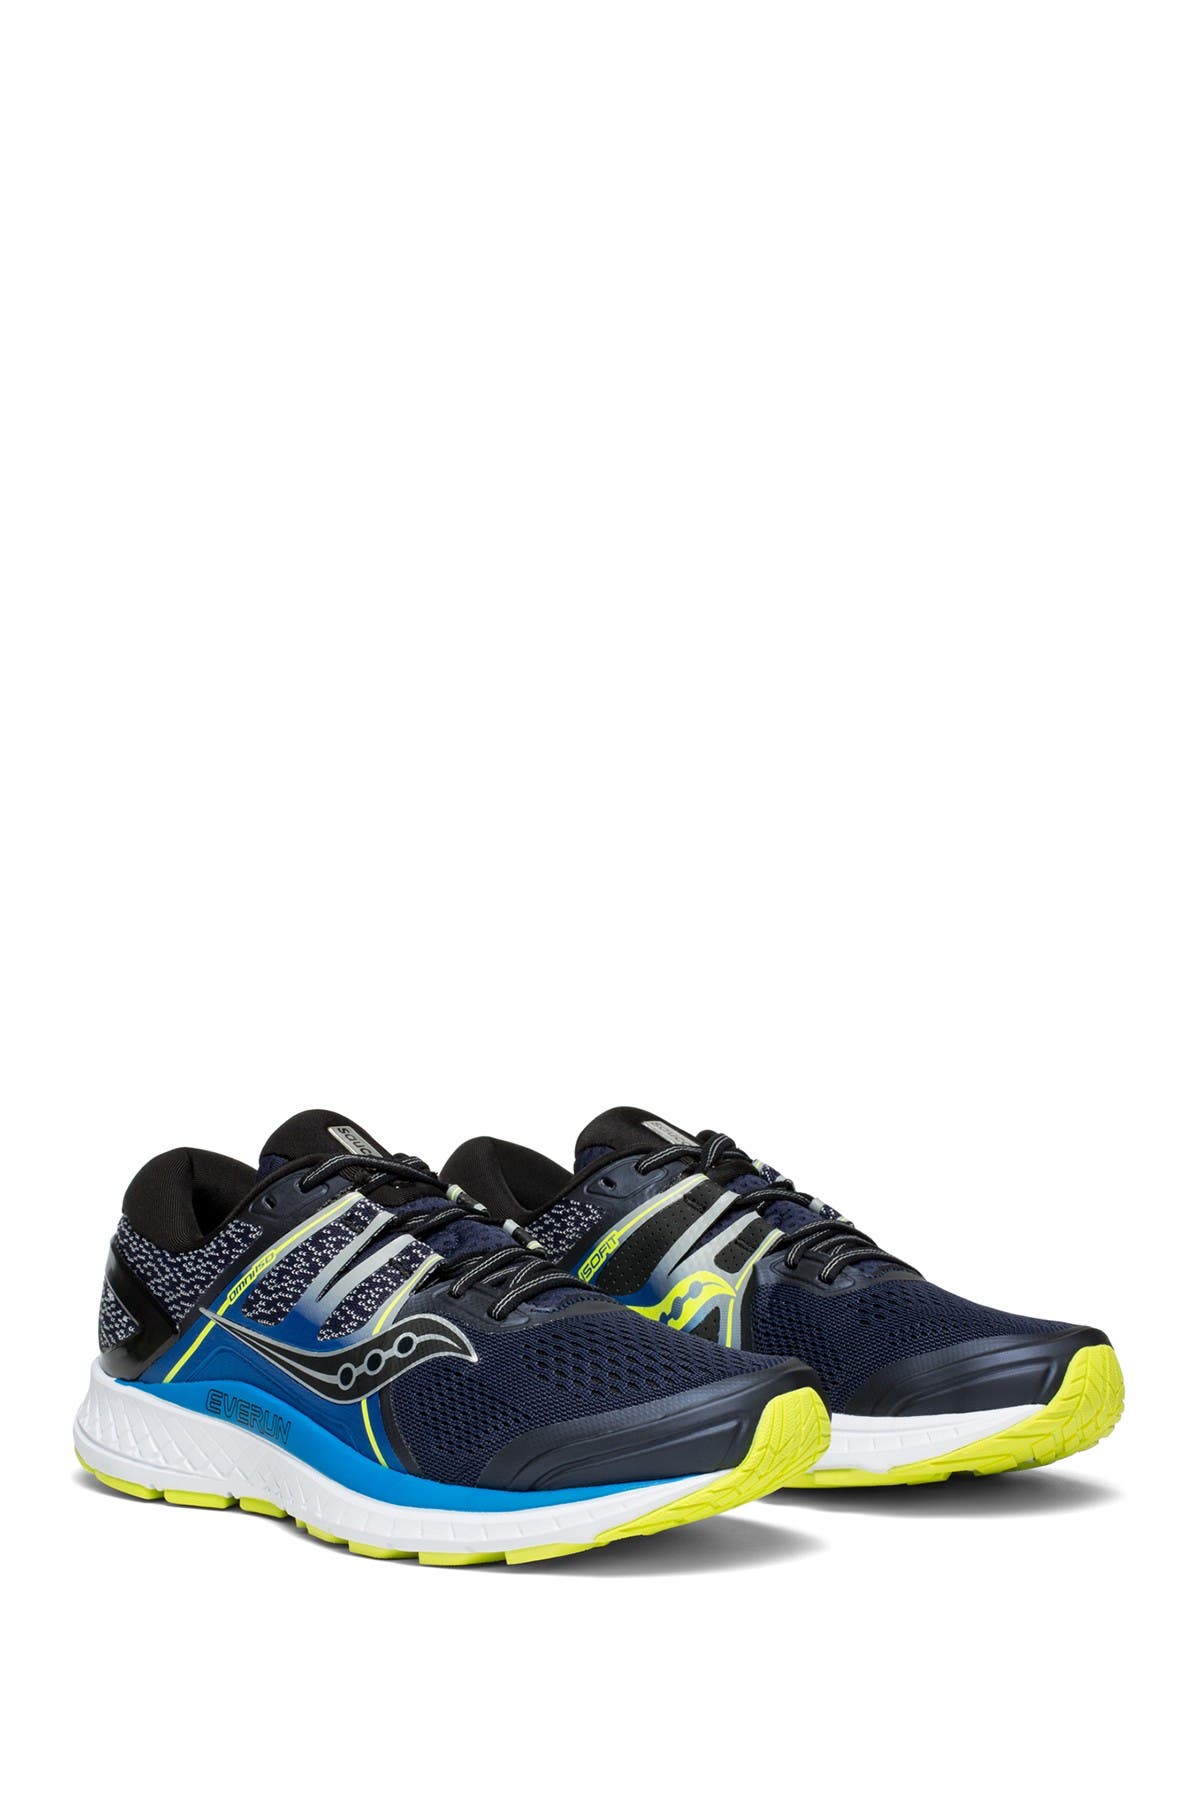 saucony omni mens running shoes